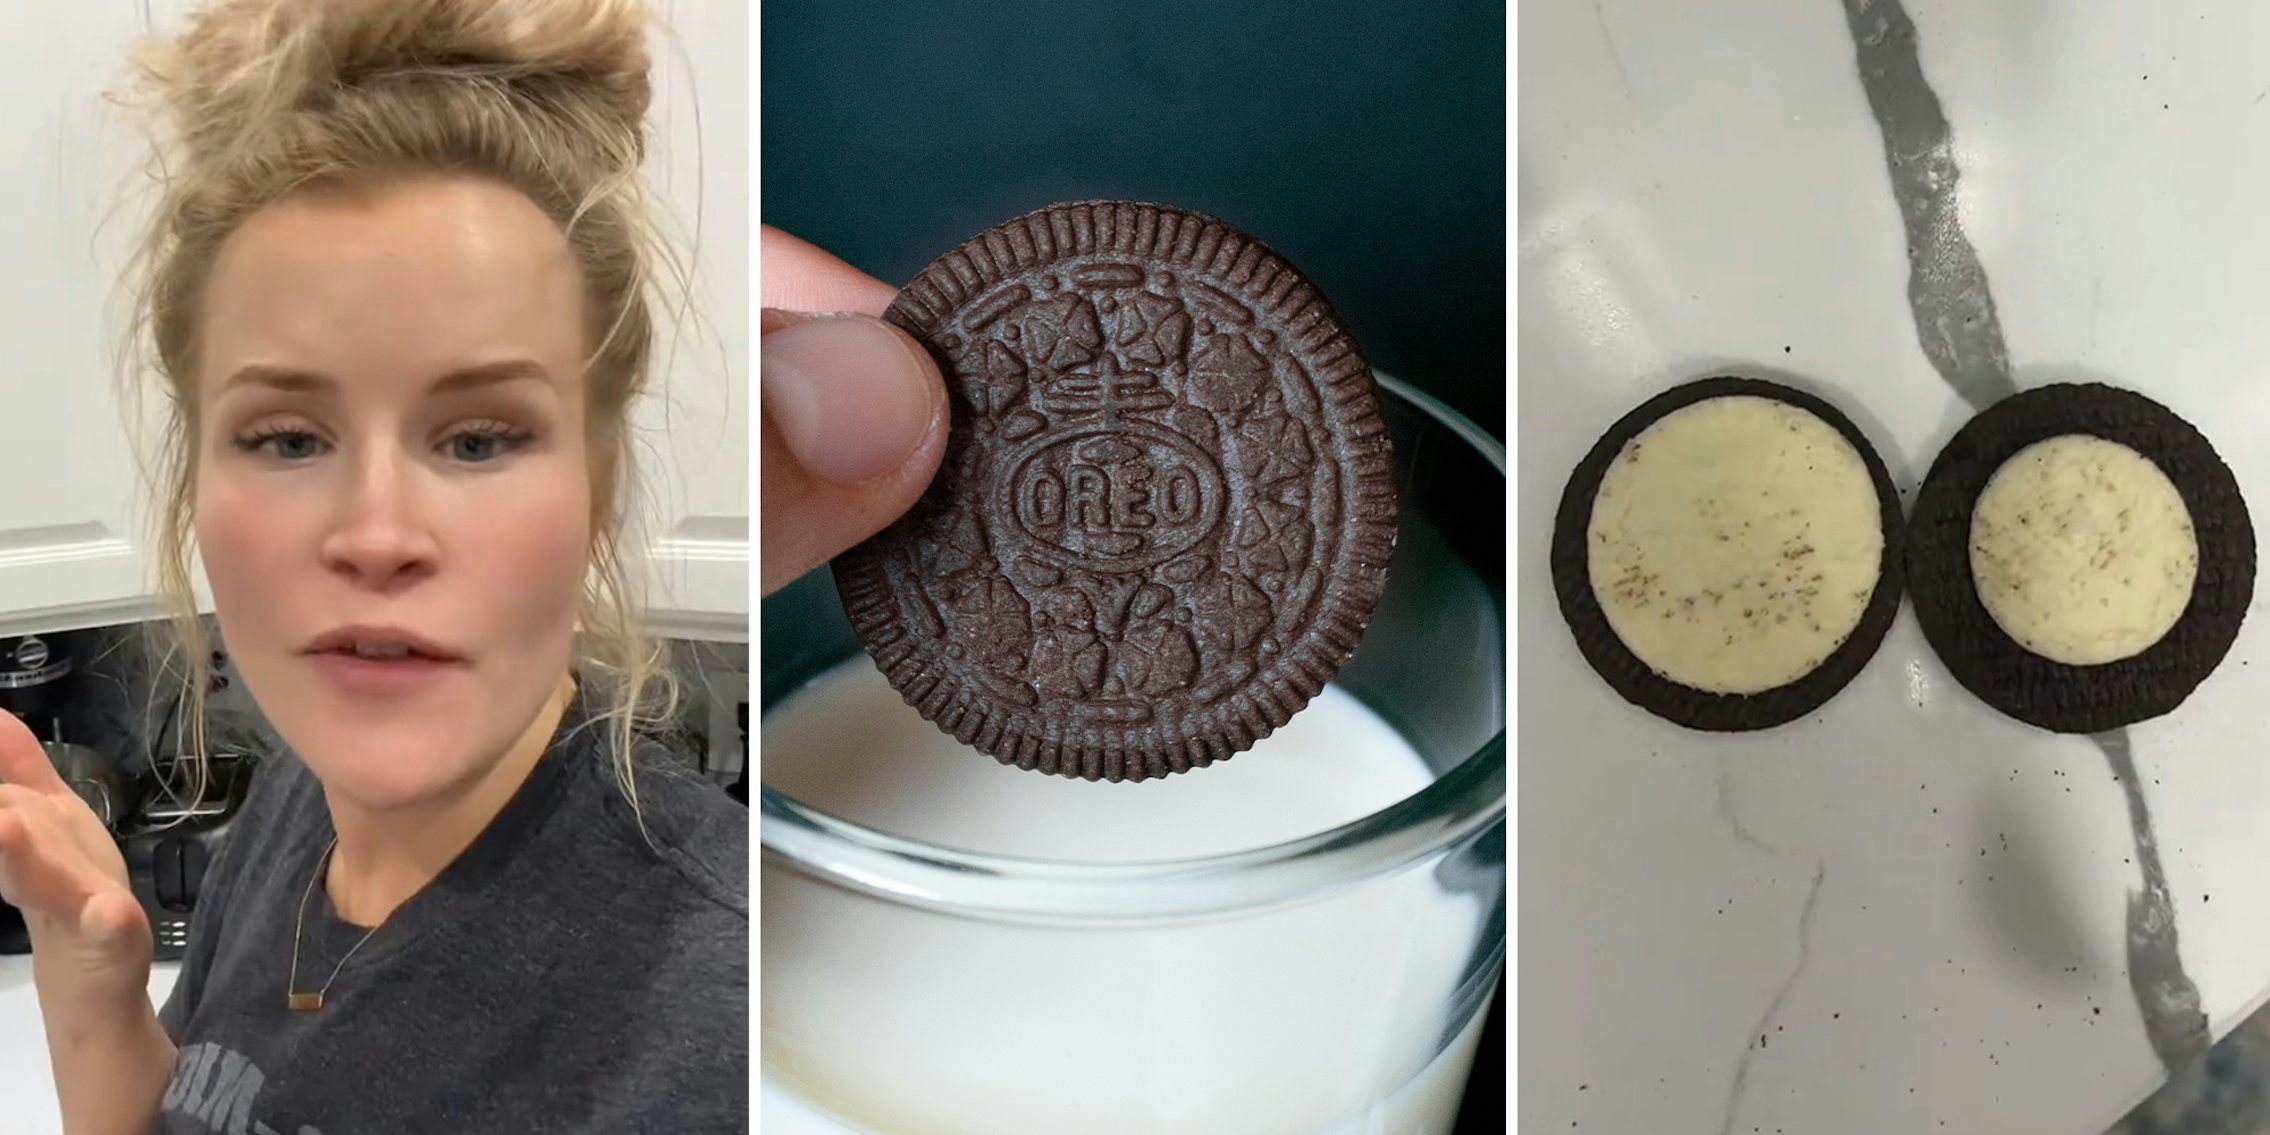 Woman Claims Oreo Shrunk Amount of Cream in Its Cookies